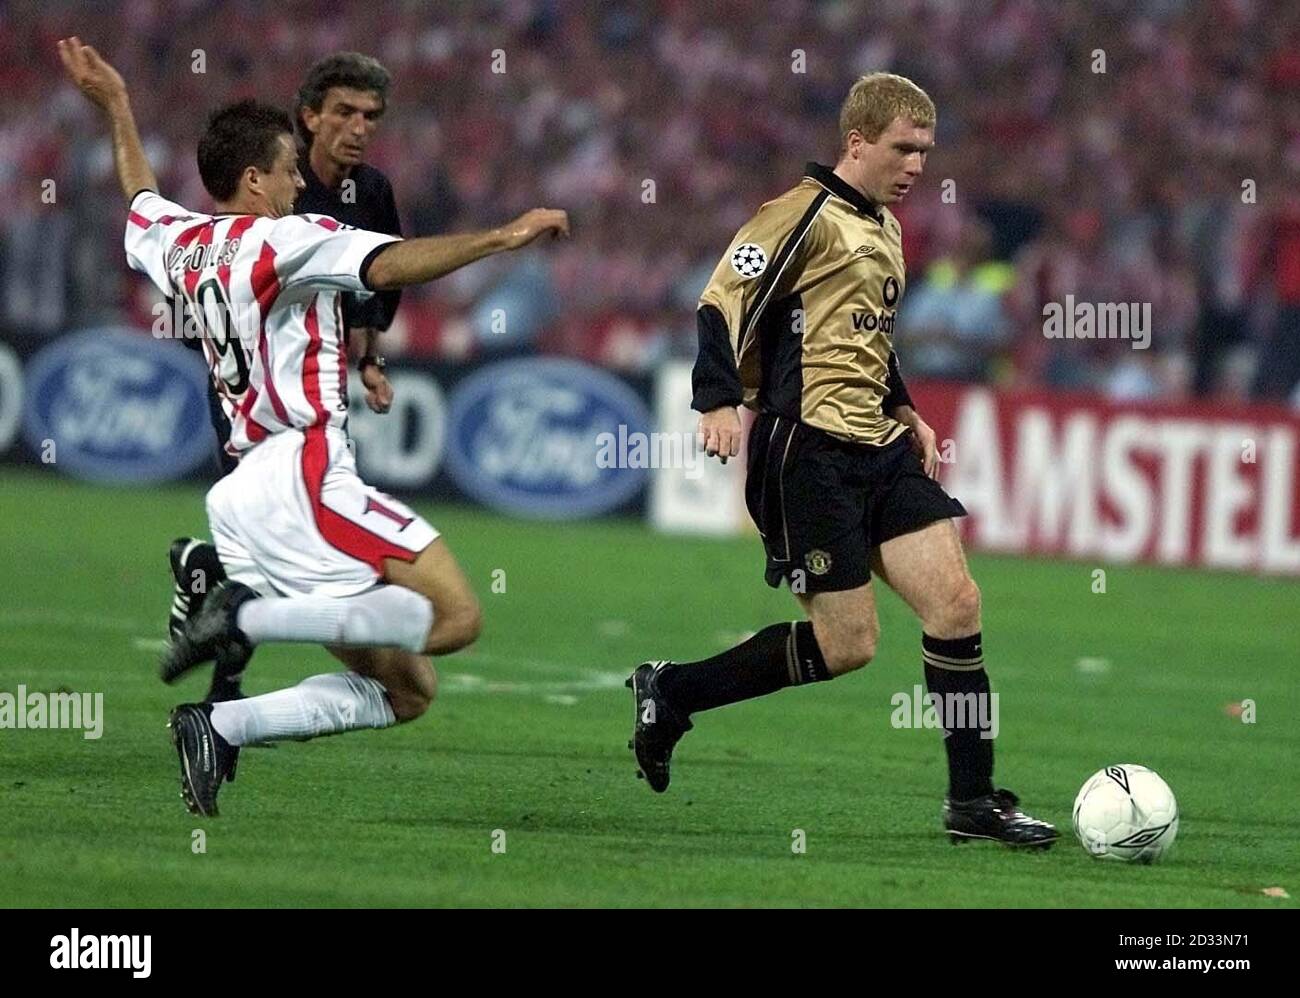 Manchester United's Paul Scholes battles for the ball Olympiakos's  Athanasions Kostoulas during the UEFA Champions League Group G match at The  Spyros Louis, Pireas, Greece. THIS PICTURE CAN ONLY BE USED WITHIN